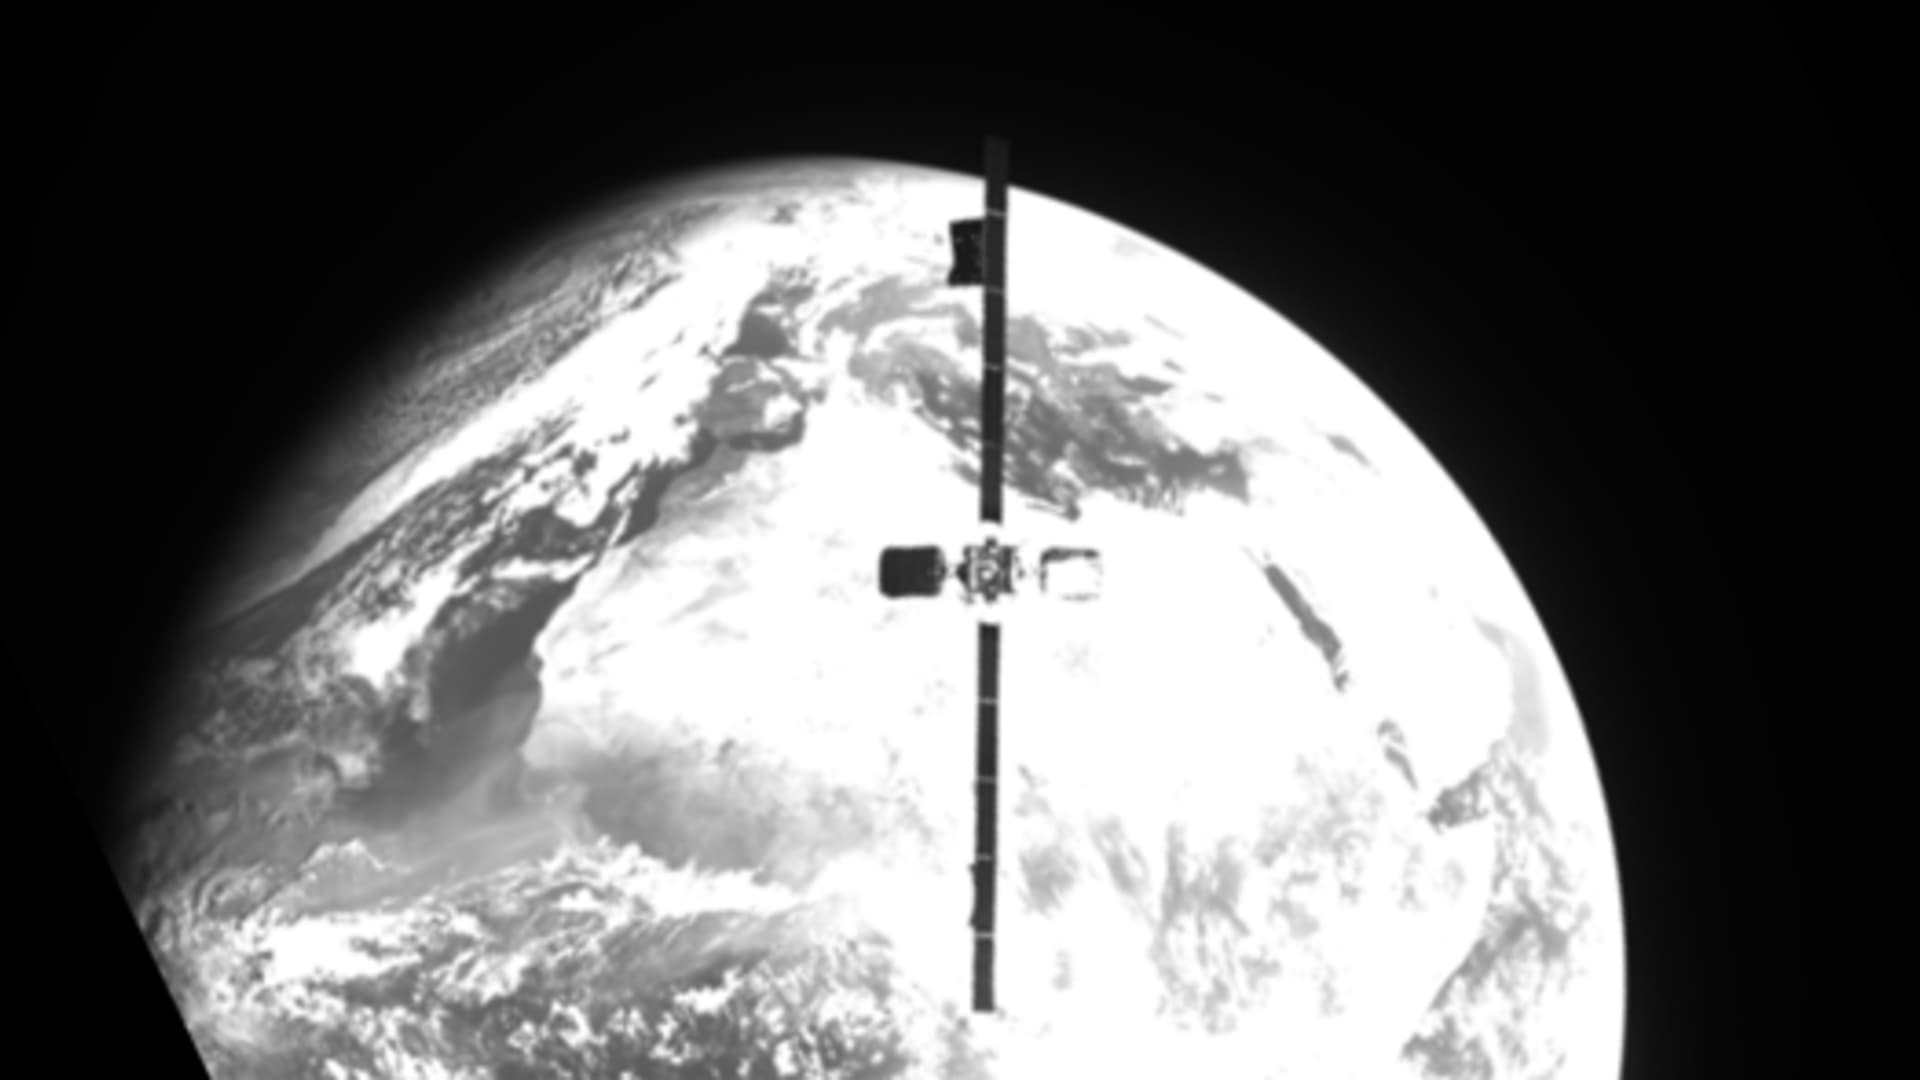 The view from Northrop Grumman's MEV-2 spacecraft as it approached to dock with Intelsat satellite IS-10-02.